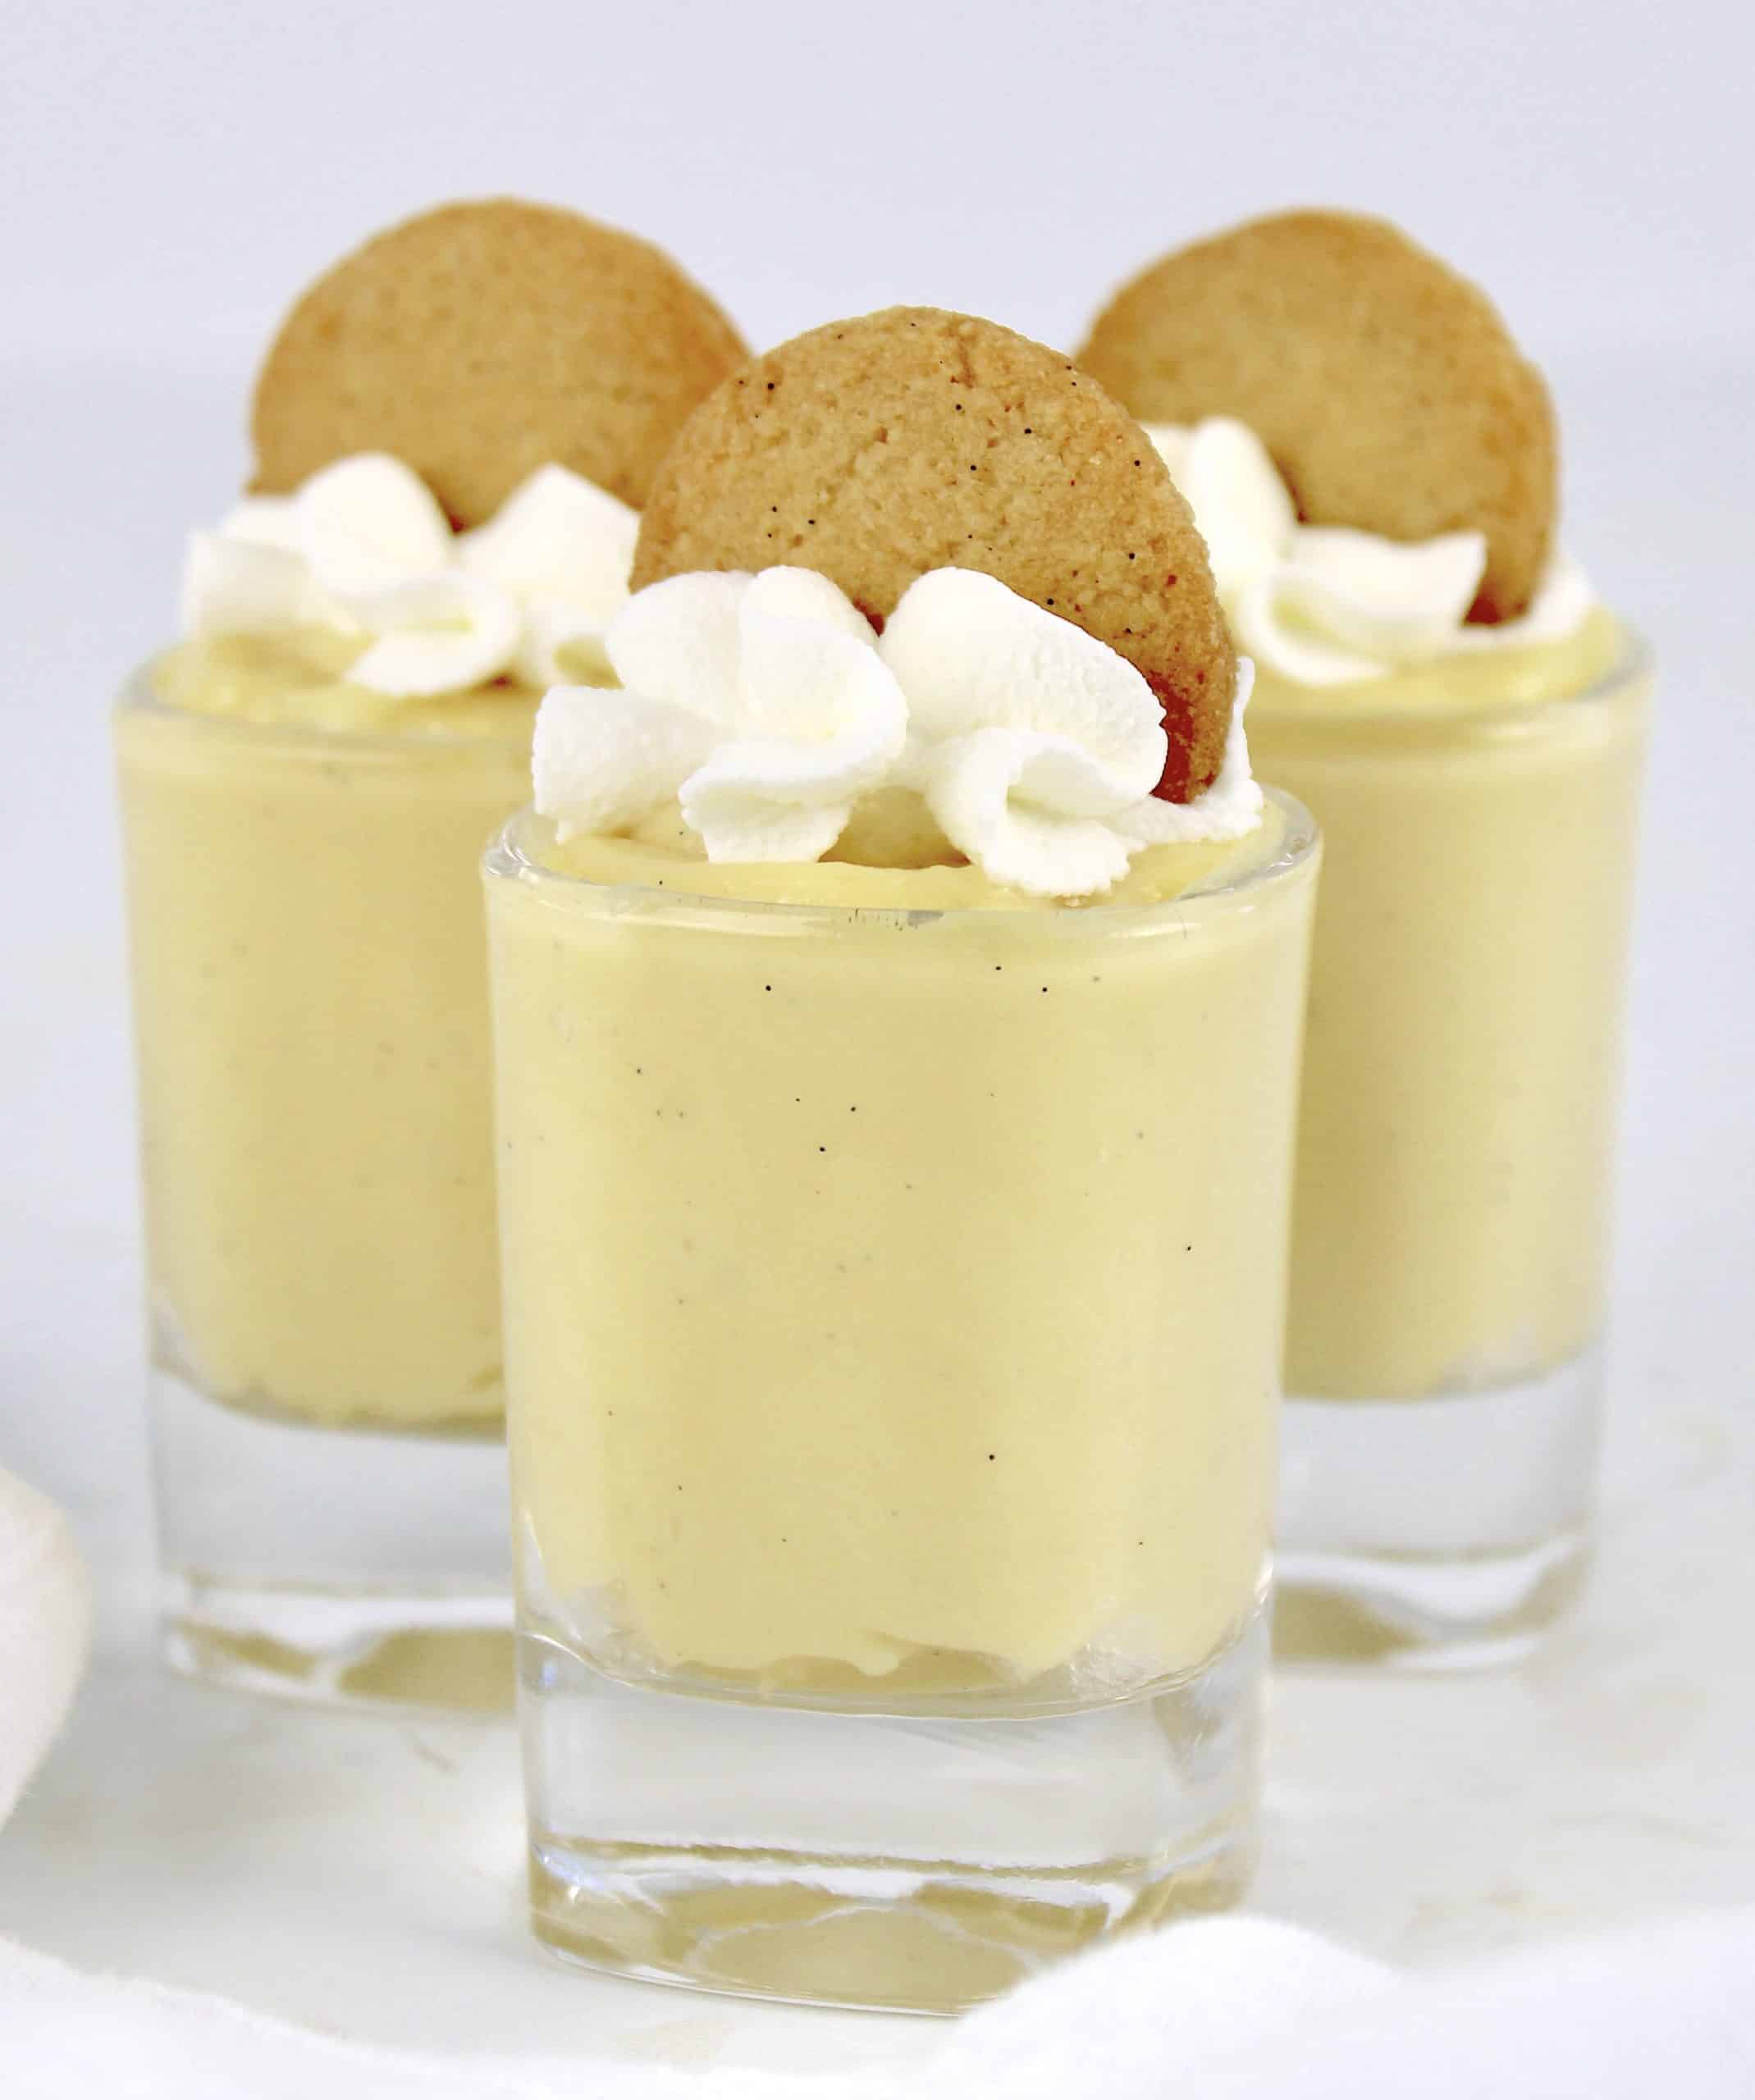 3 shot glasses with vanilla pudding with nilla wafers on top